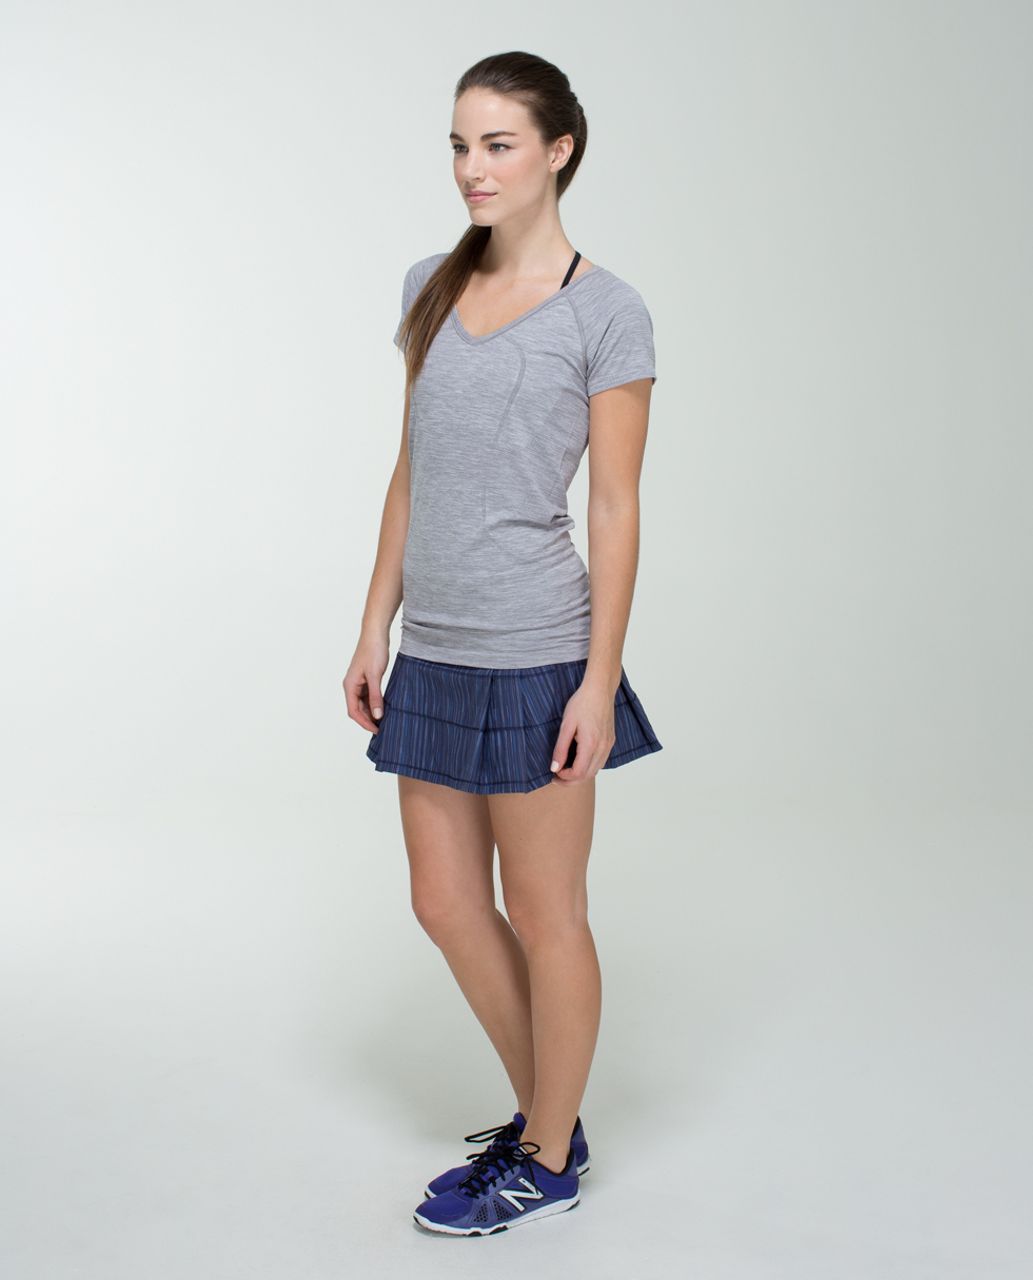 Lululemon Pace Rival Skirt (Regular) *2-way Stretch - Wee Are From Space Cadet Blue / Cadet Blue